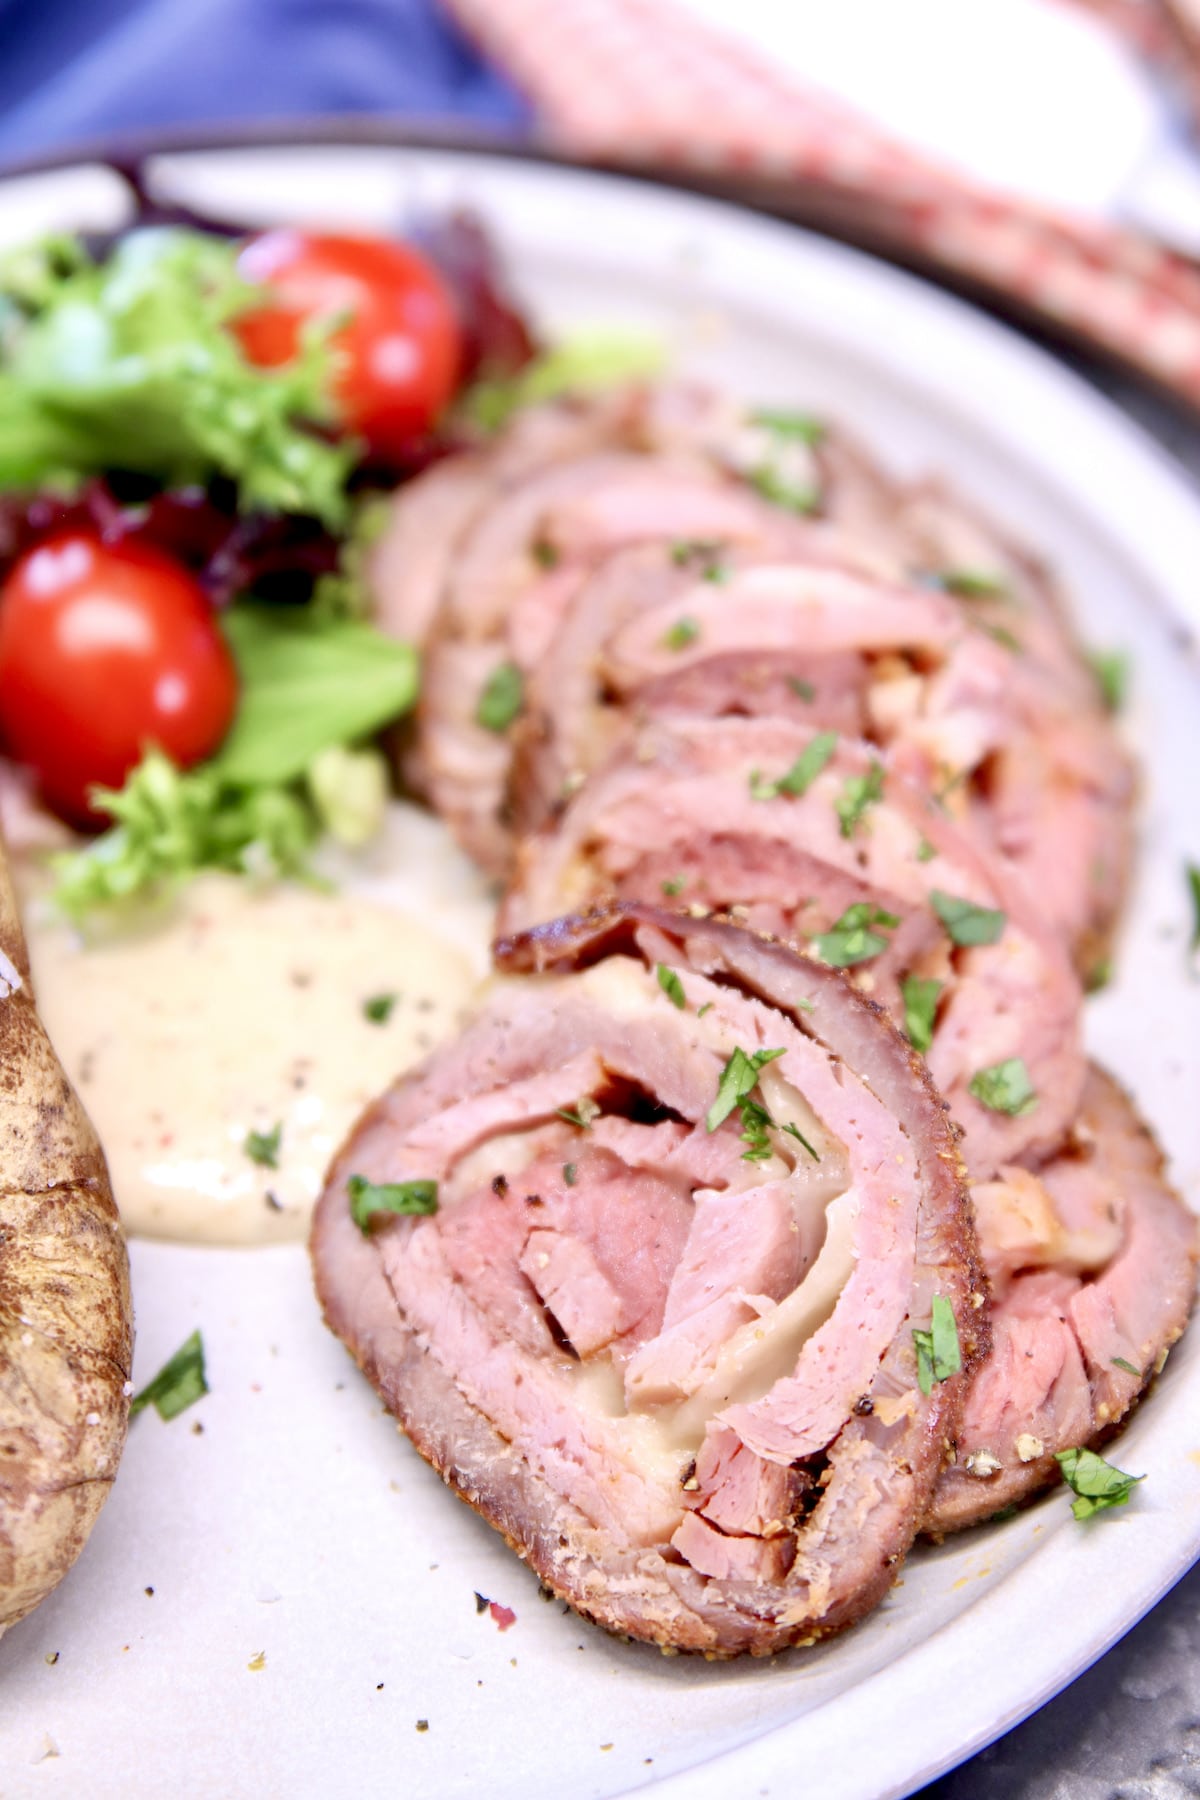 Plate of beef cordon bleu slices with salad.